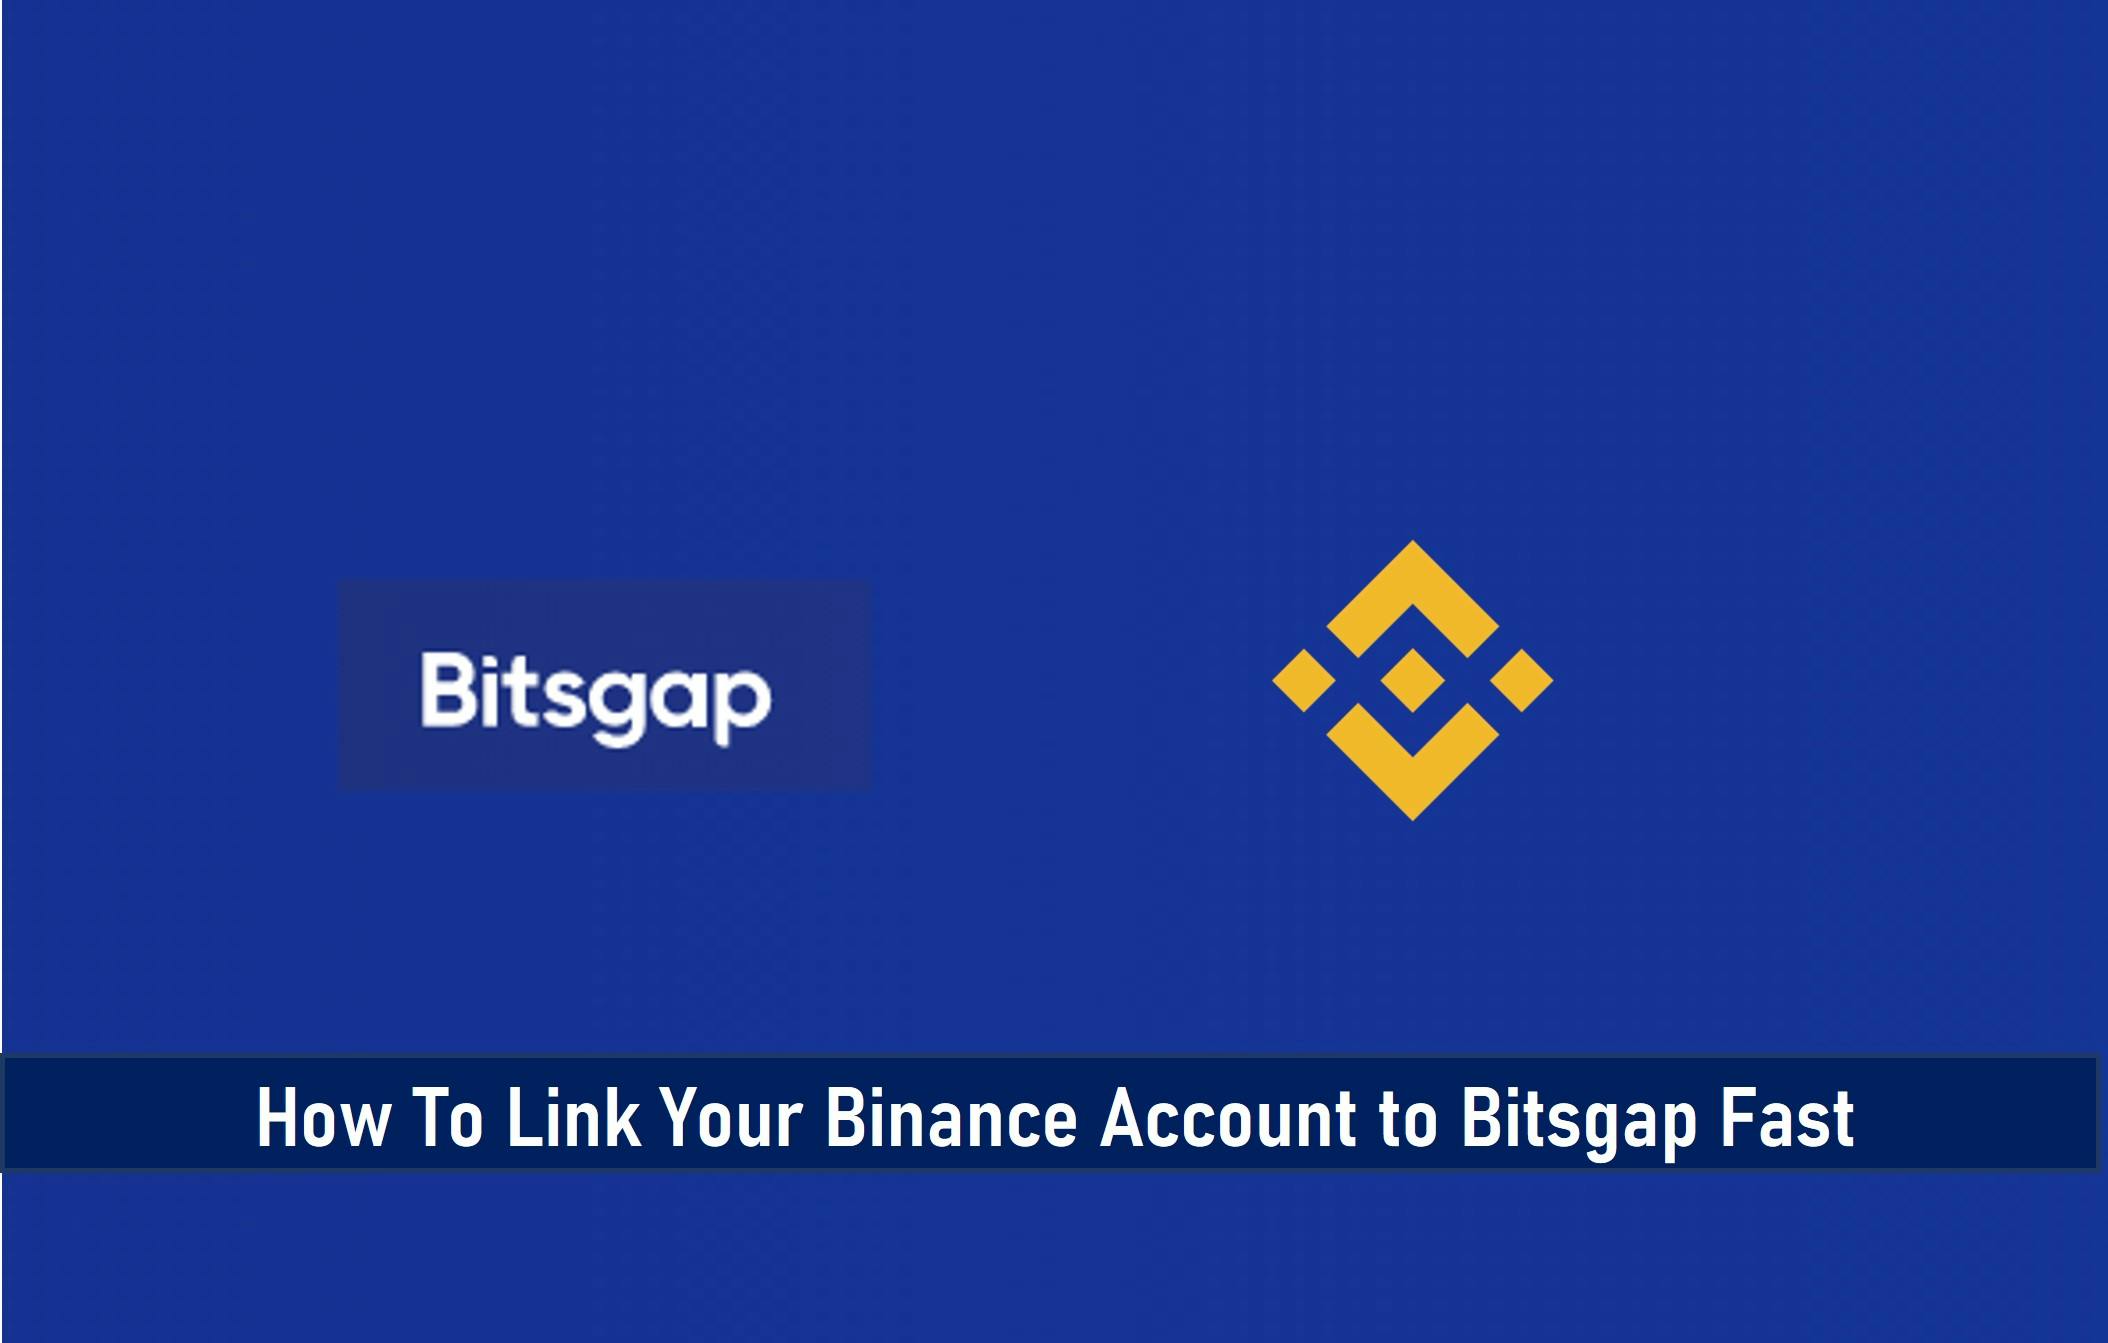 How To Link Your Binance Account to Bitsgap Fast